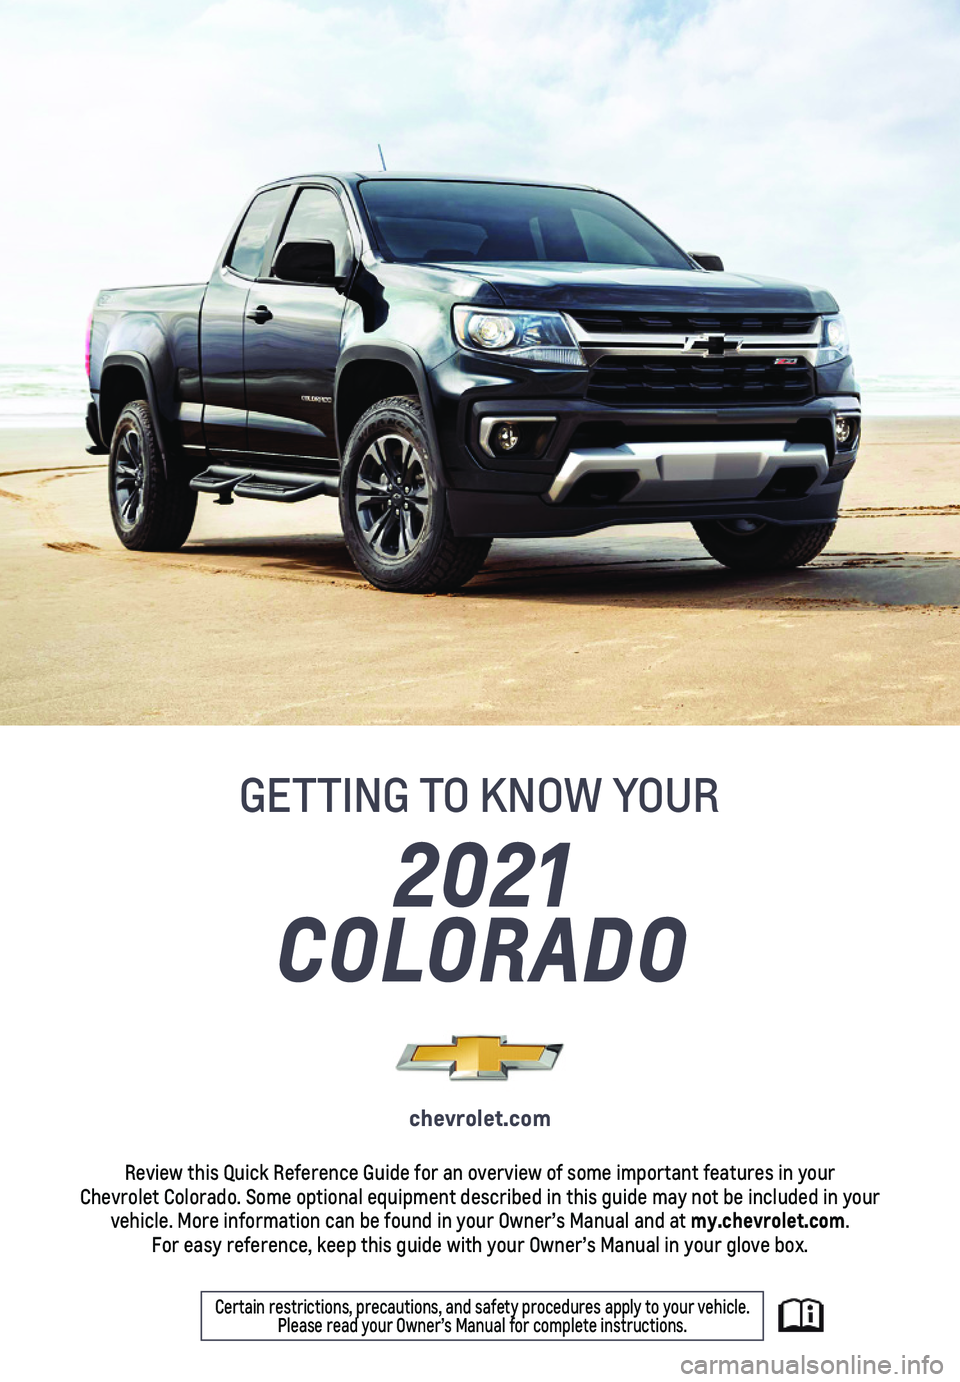 CHEVROLET COLORADO 2021  Get To Know Guide 1
2021 
COLORADO
GETTING TO KNOW YOUR
chevrolet.com
Review this Quick Reference Guide for an overview of some important feat\
ures in your  Chevrolet Colorado. Some optional equipment described in thi